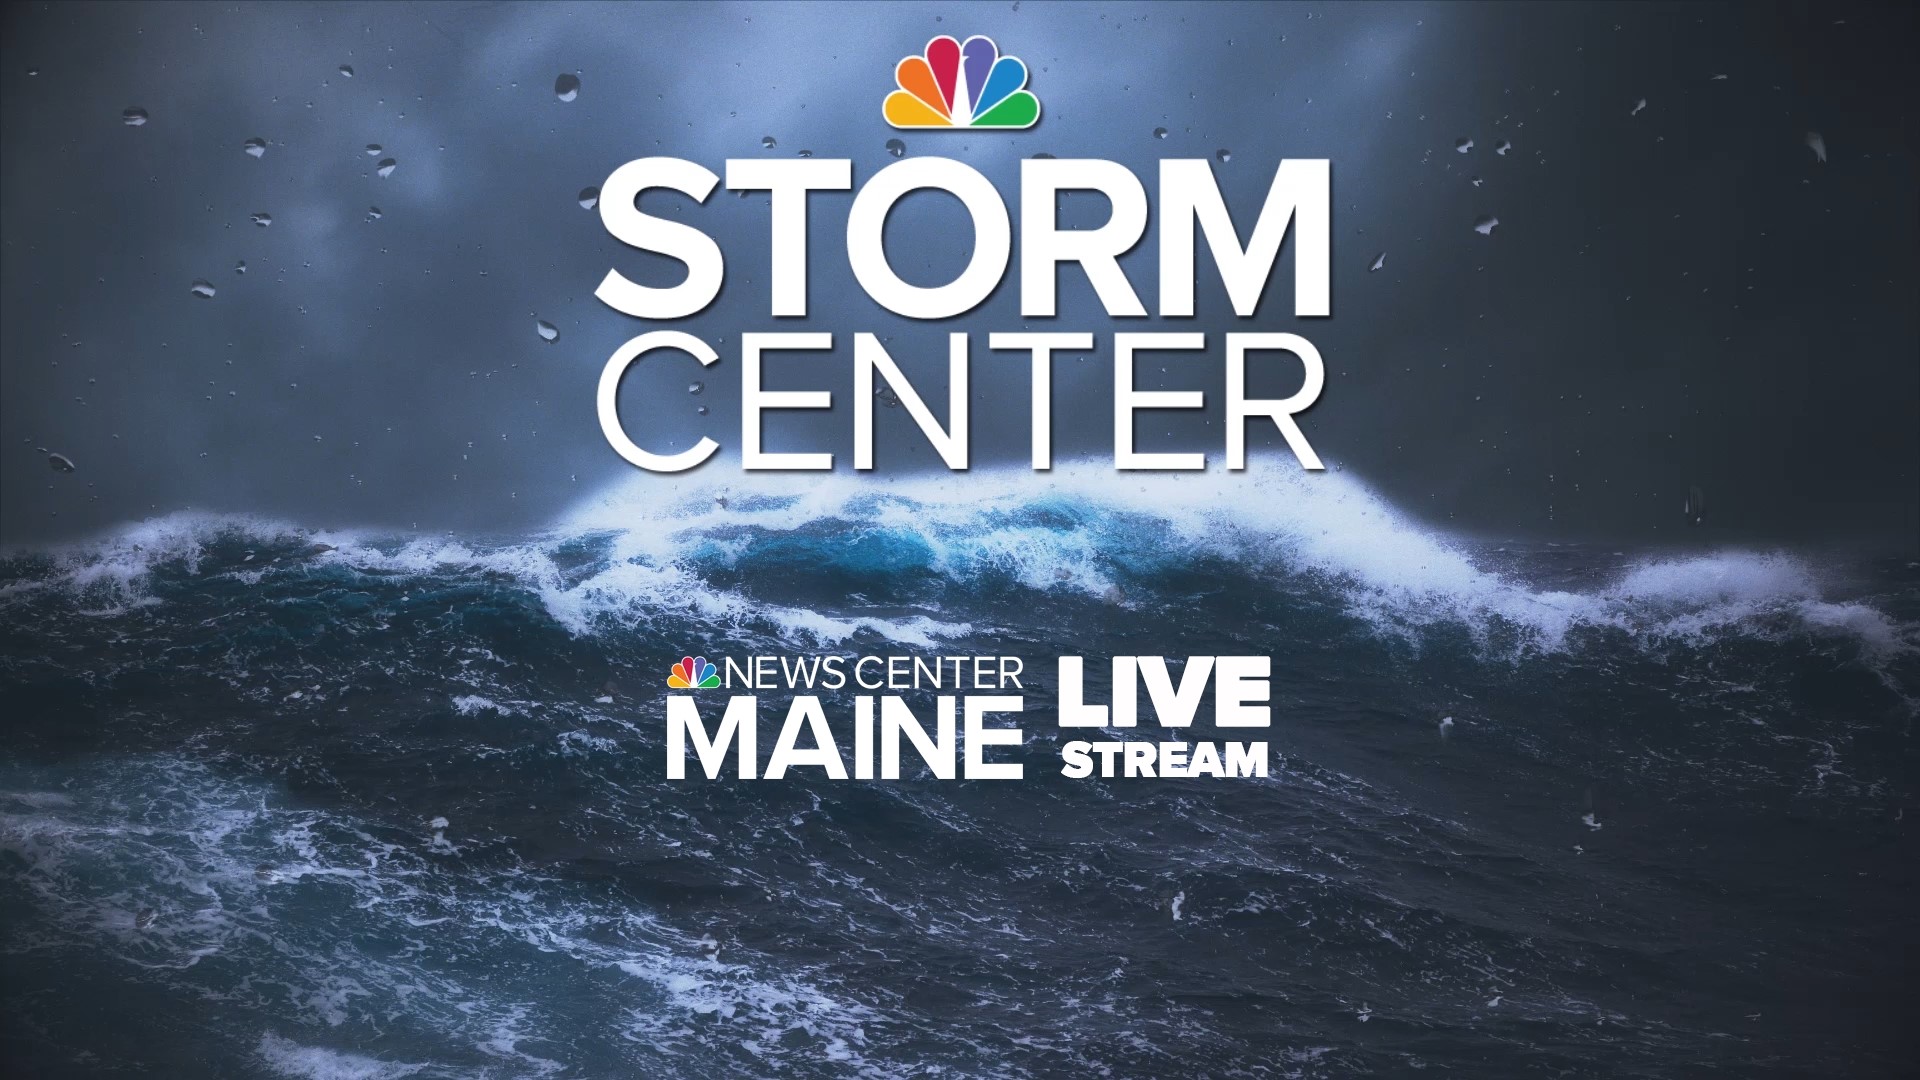 NEWS CENTER Maine presents local, regional, state and national news, along with the latest breaking news events and weather.